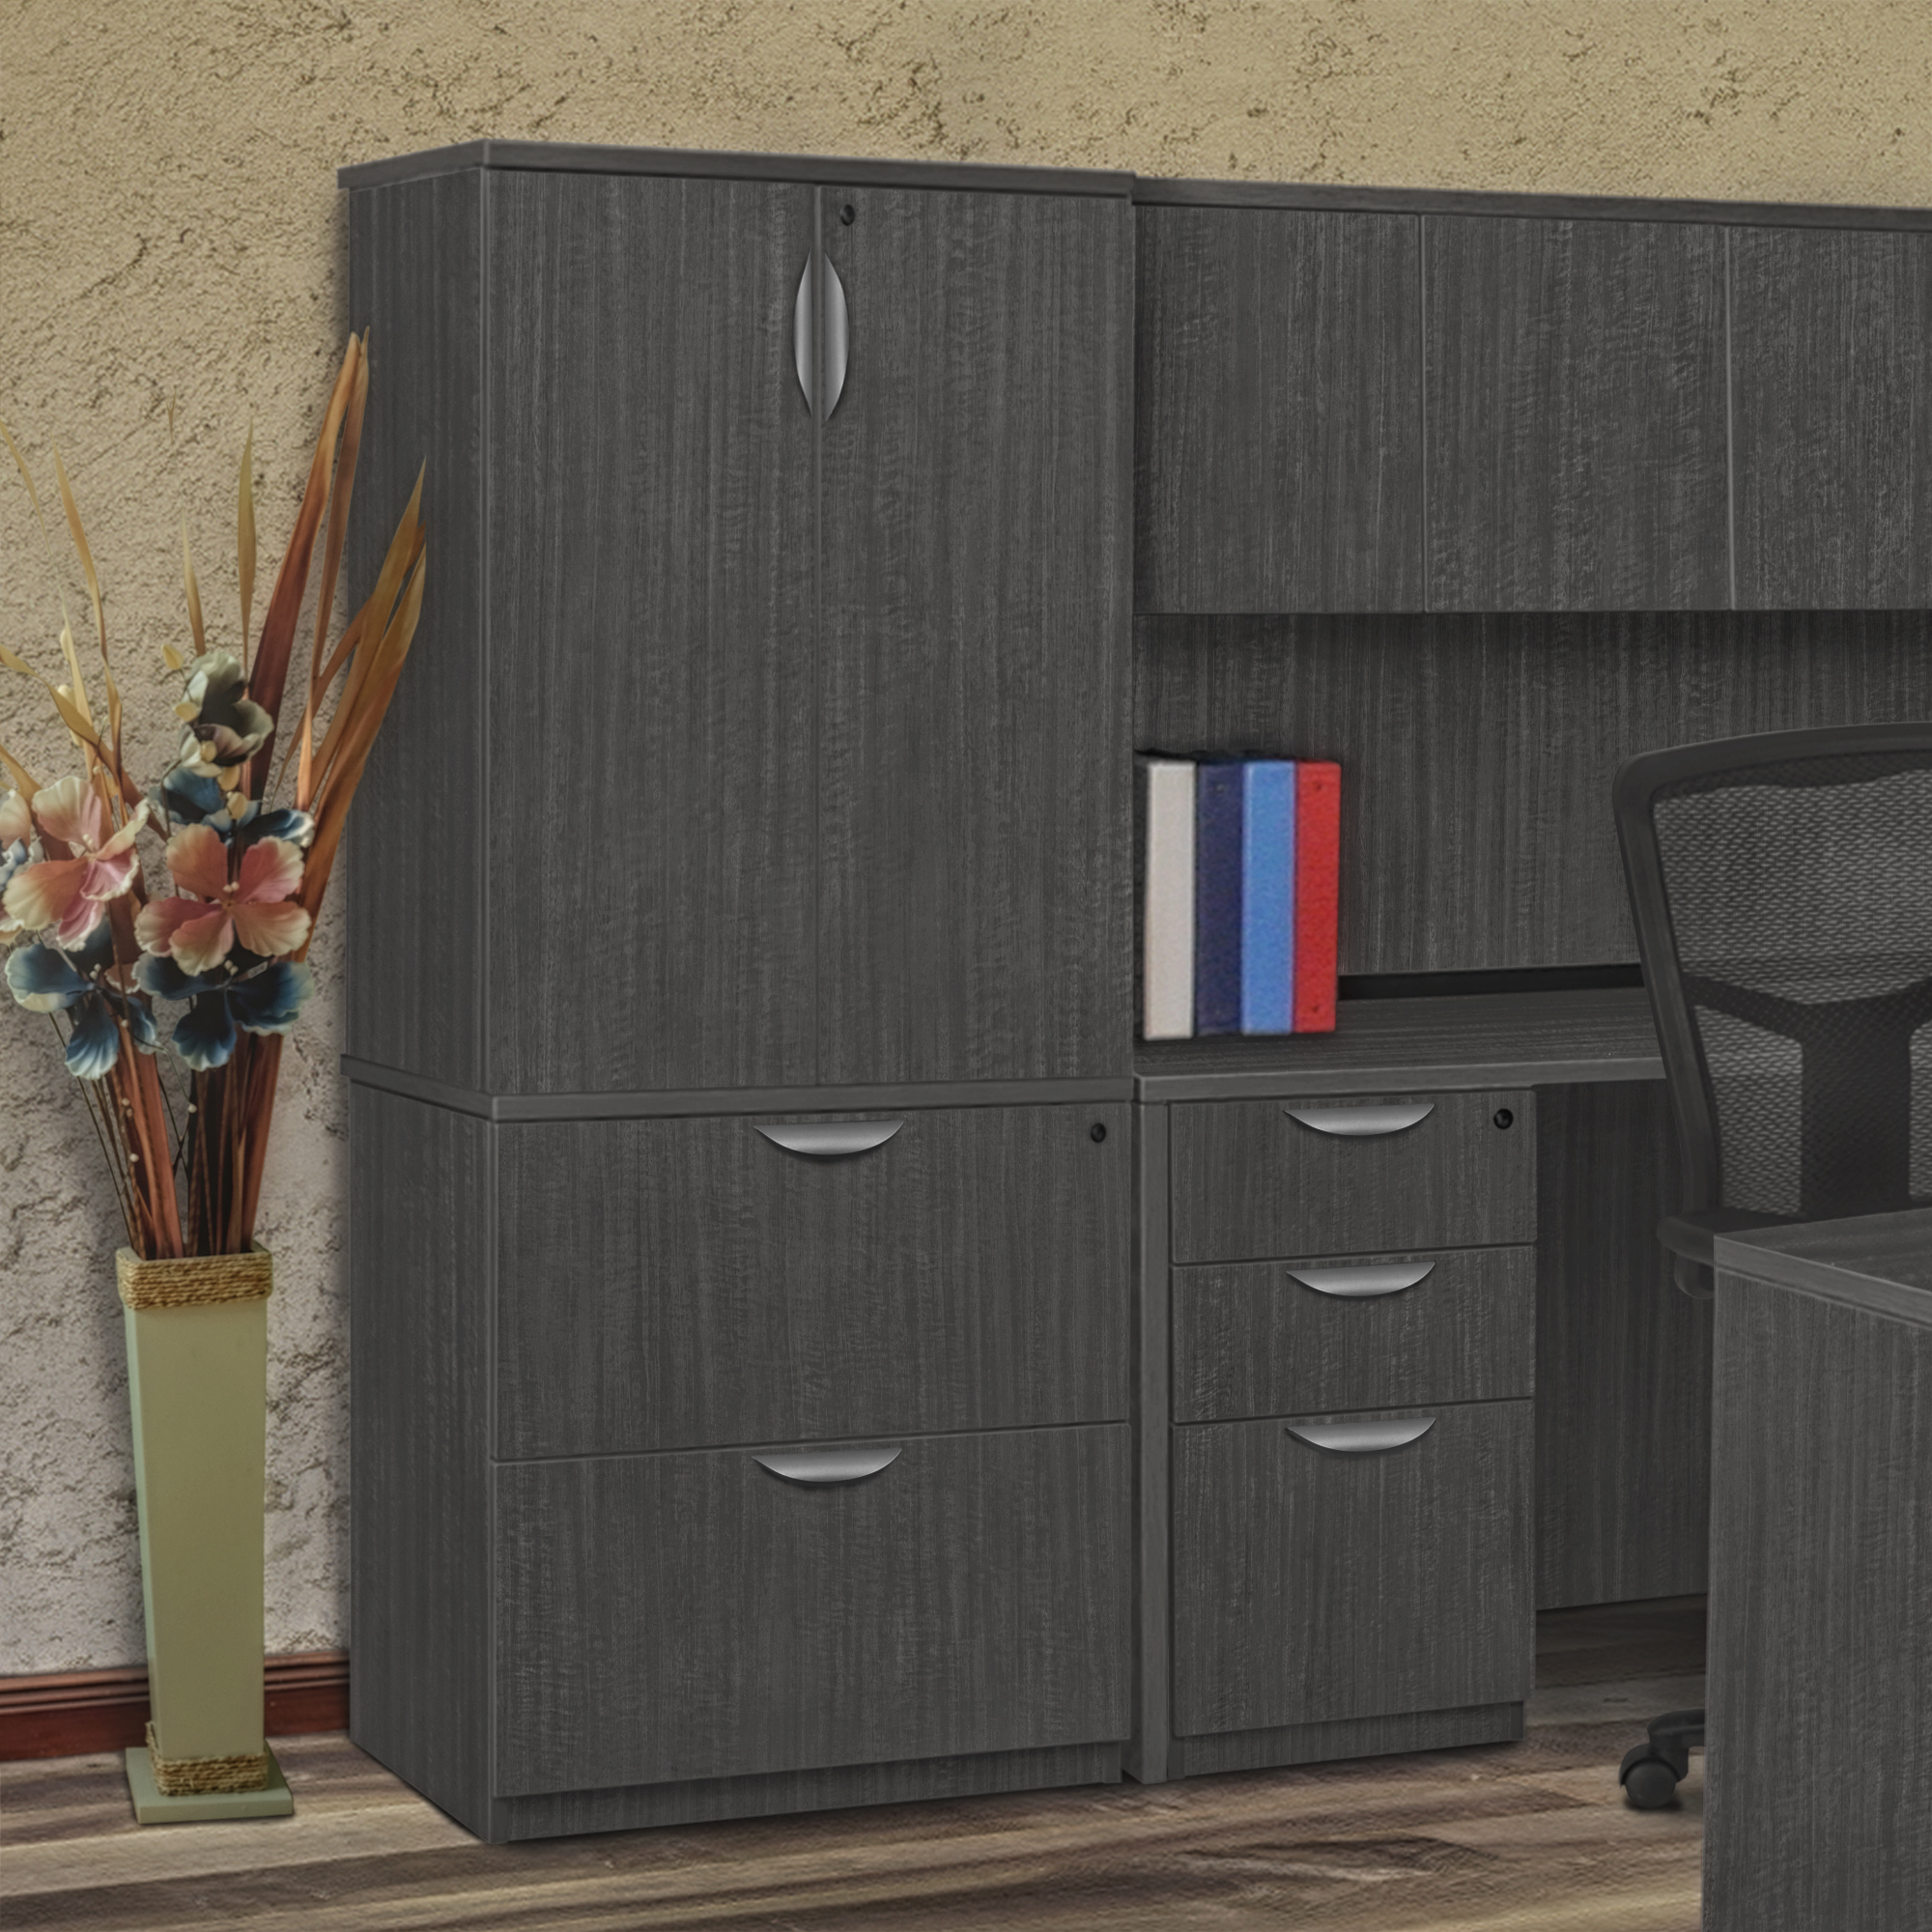 Legacy Lateral File with Stackable Storage Cabinet- Ash Grey - image 2 of 8